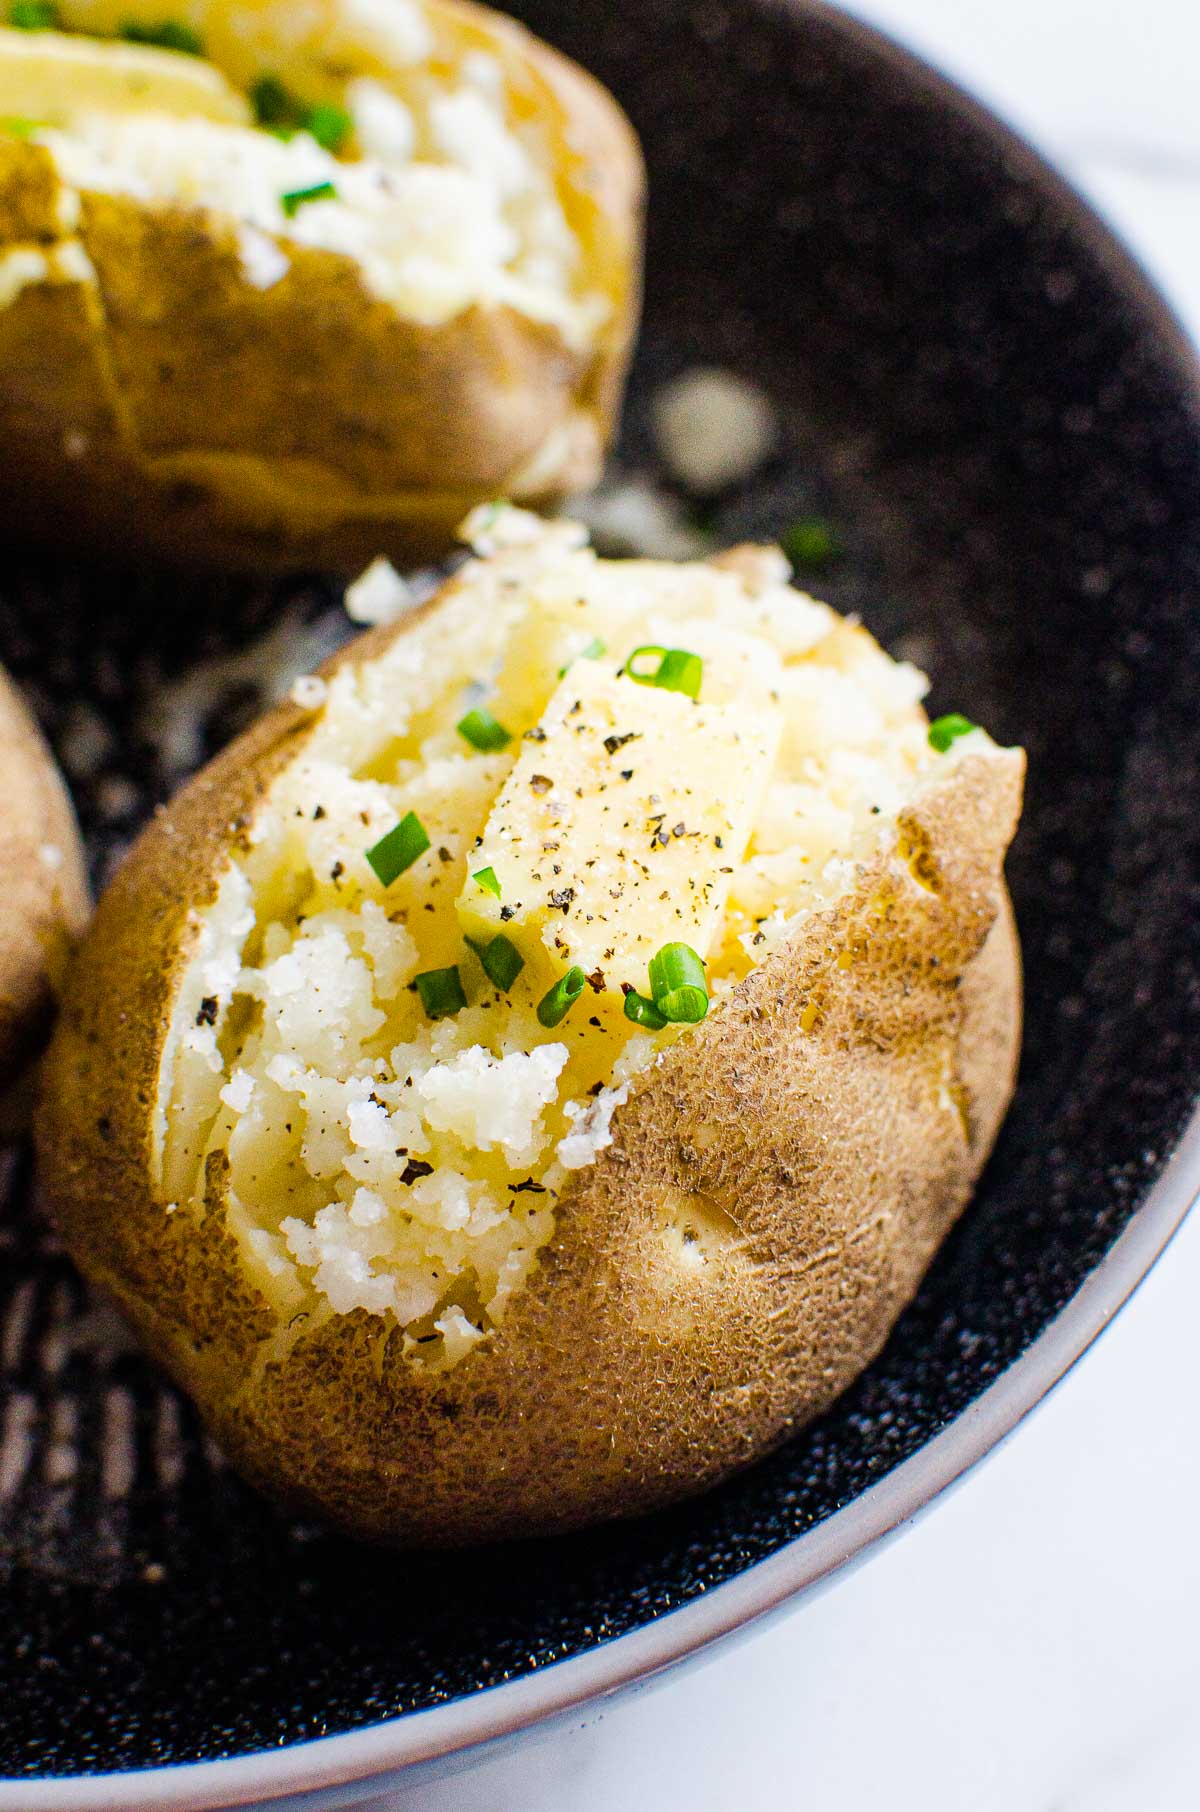 Plated Instant Pot baked potatoes sliced open with butter and chives.